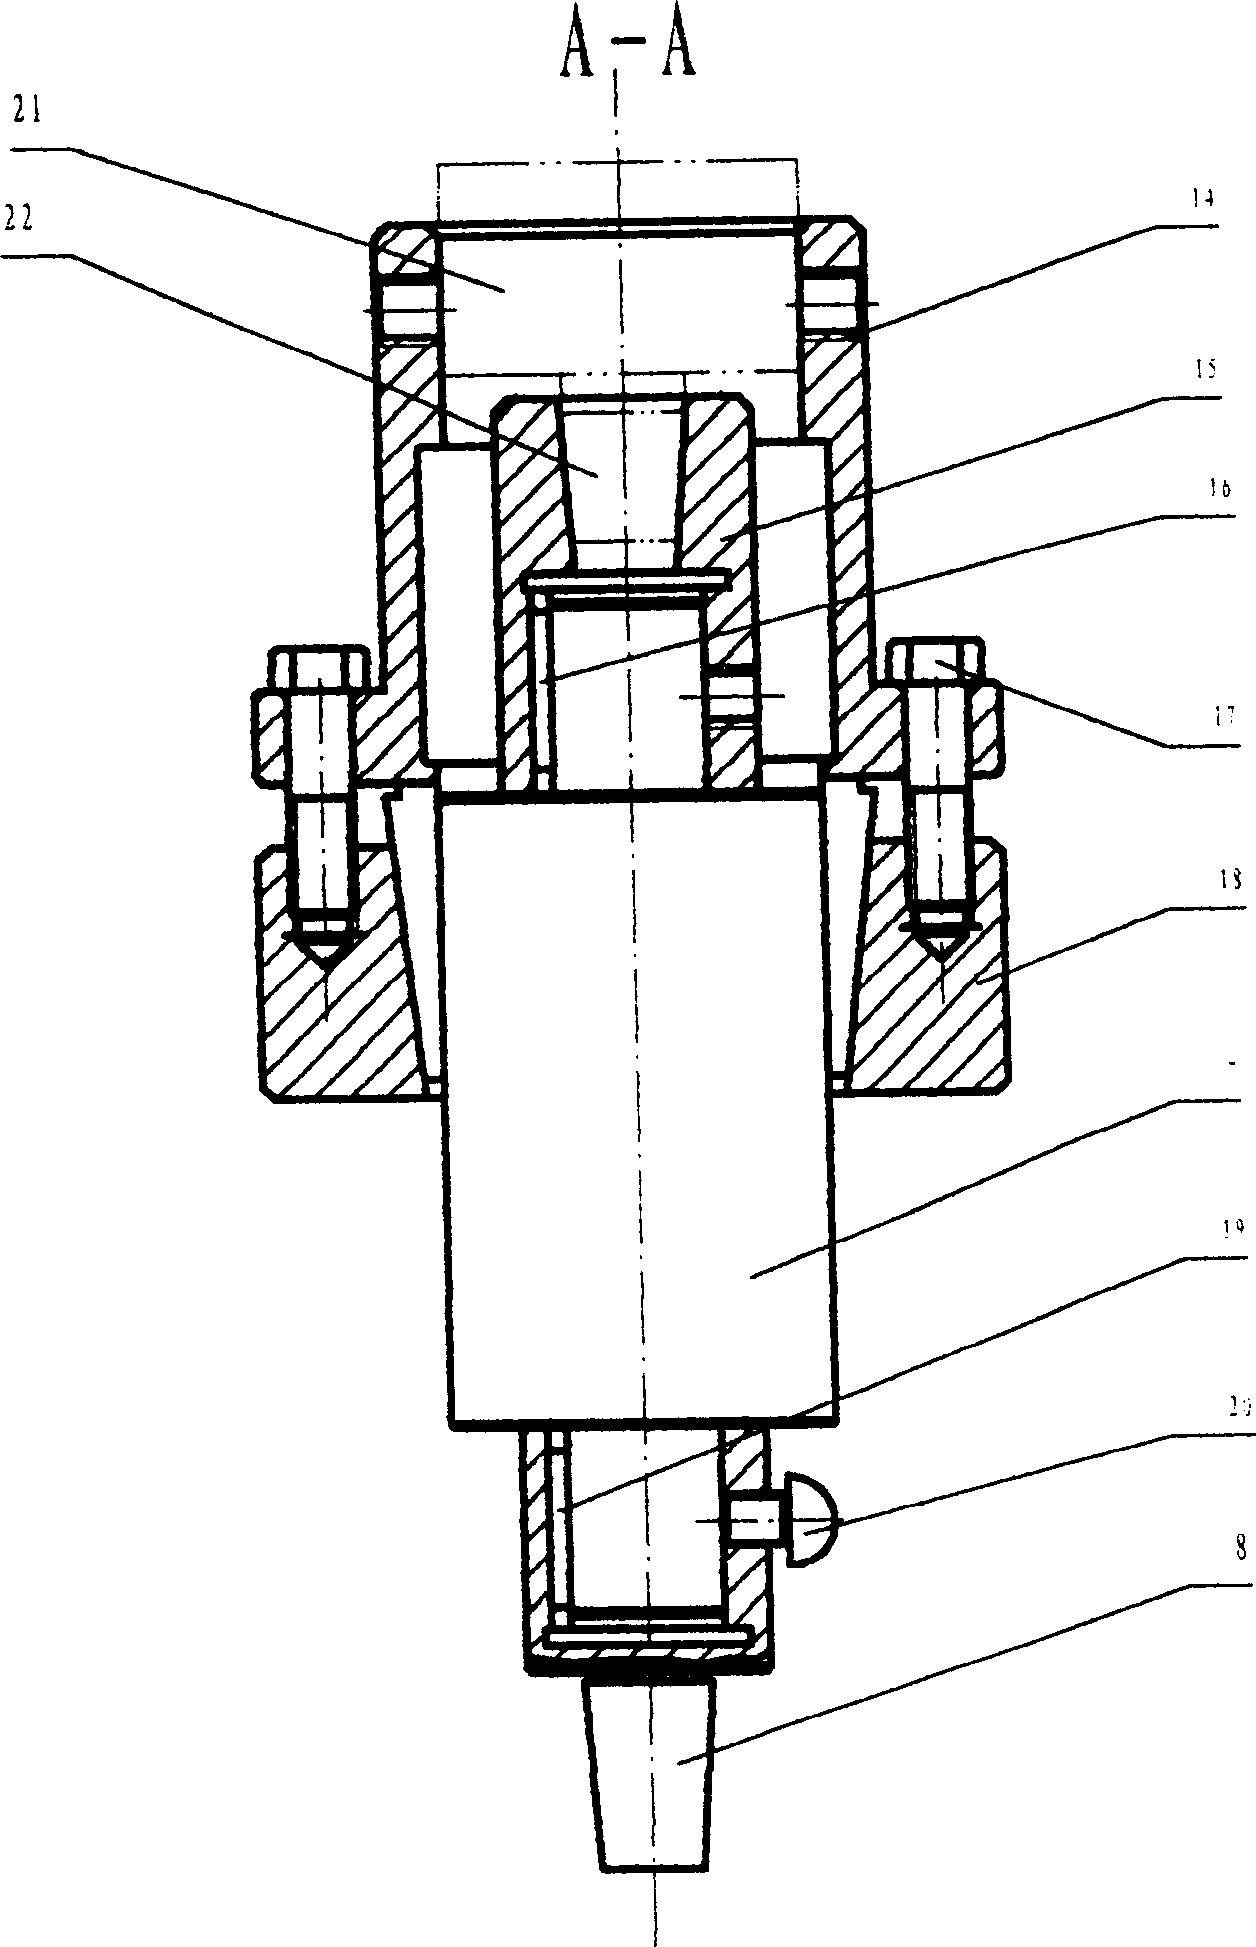 Method for on-line fault diagnosis of vibration threading and its equipment